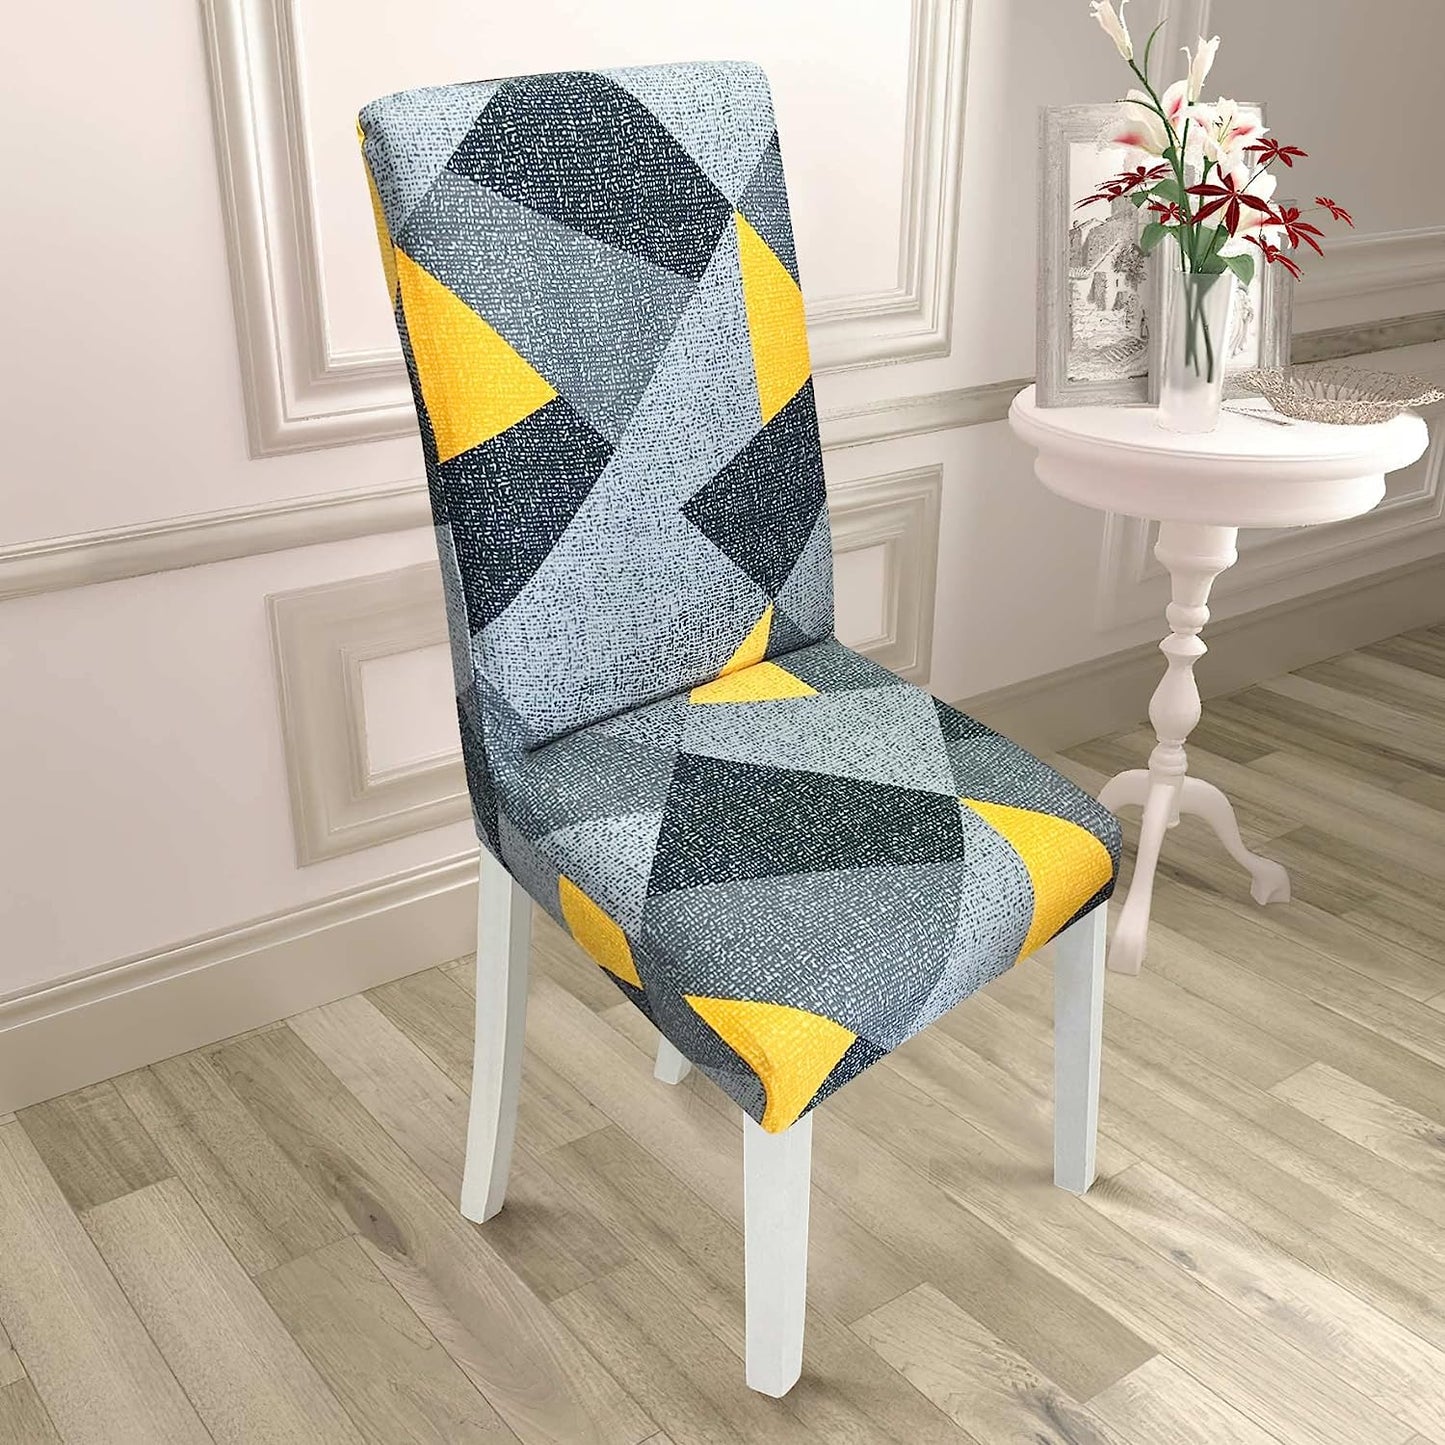 Printed Chair Cover(Beige Grey/Yellow Gems